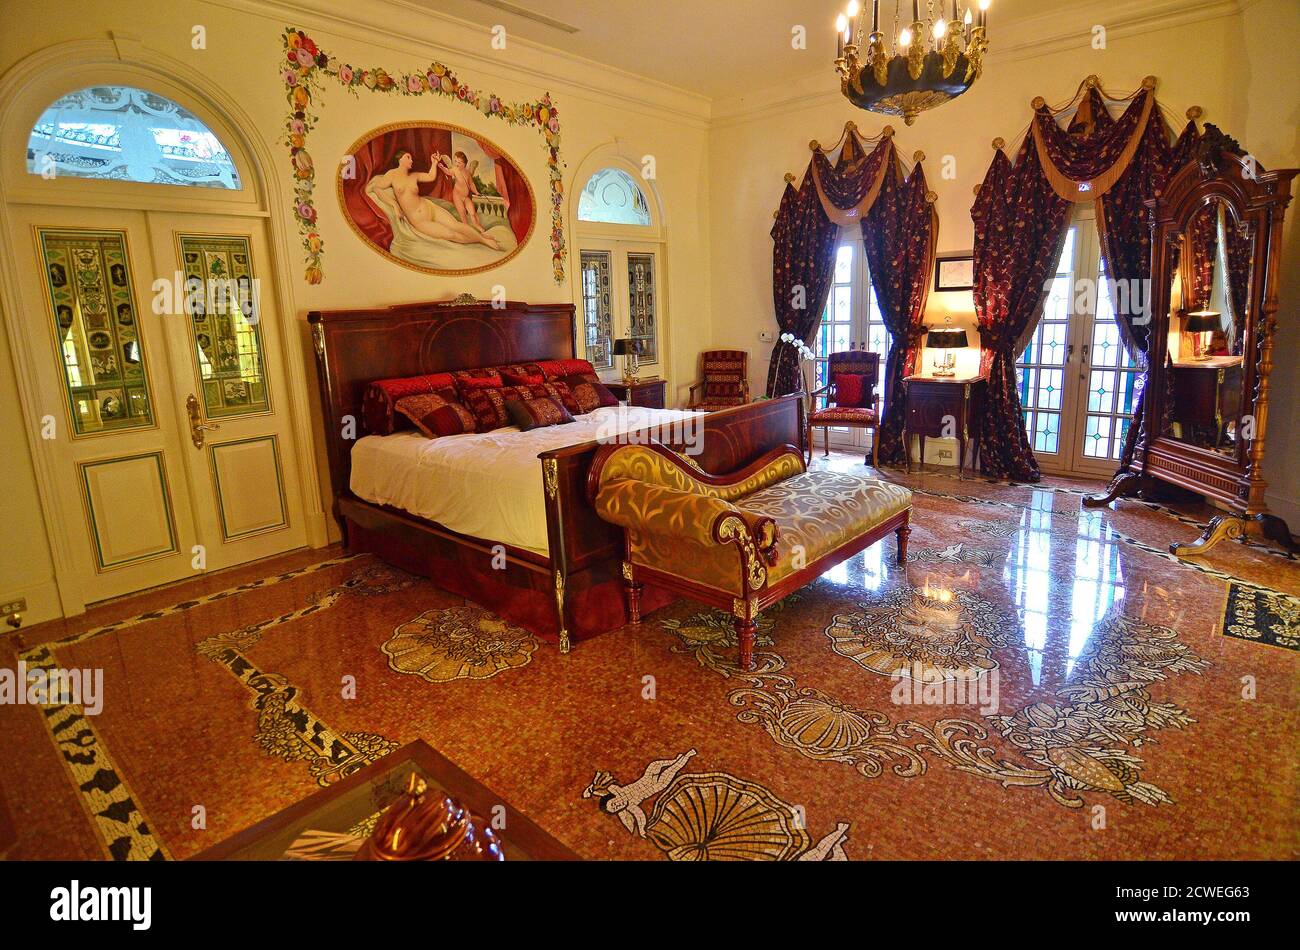 The Mosaic Suite, the room where Madonna stayed while visiting, at the  South Beach mansion formerly owned by fashion designer Gianni Versace in  Miami Beach, Florida July 23, 2013. Versace spent $33